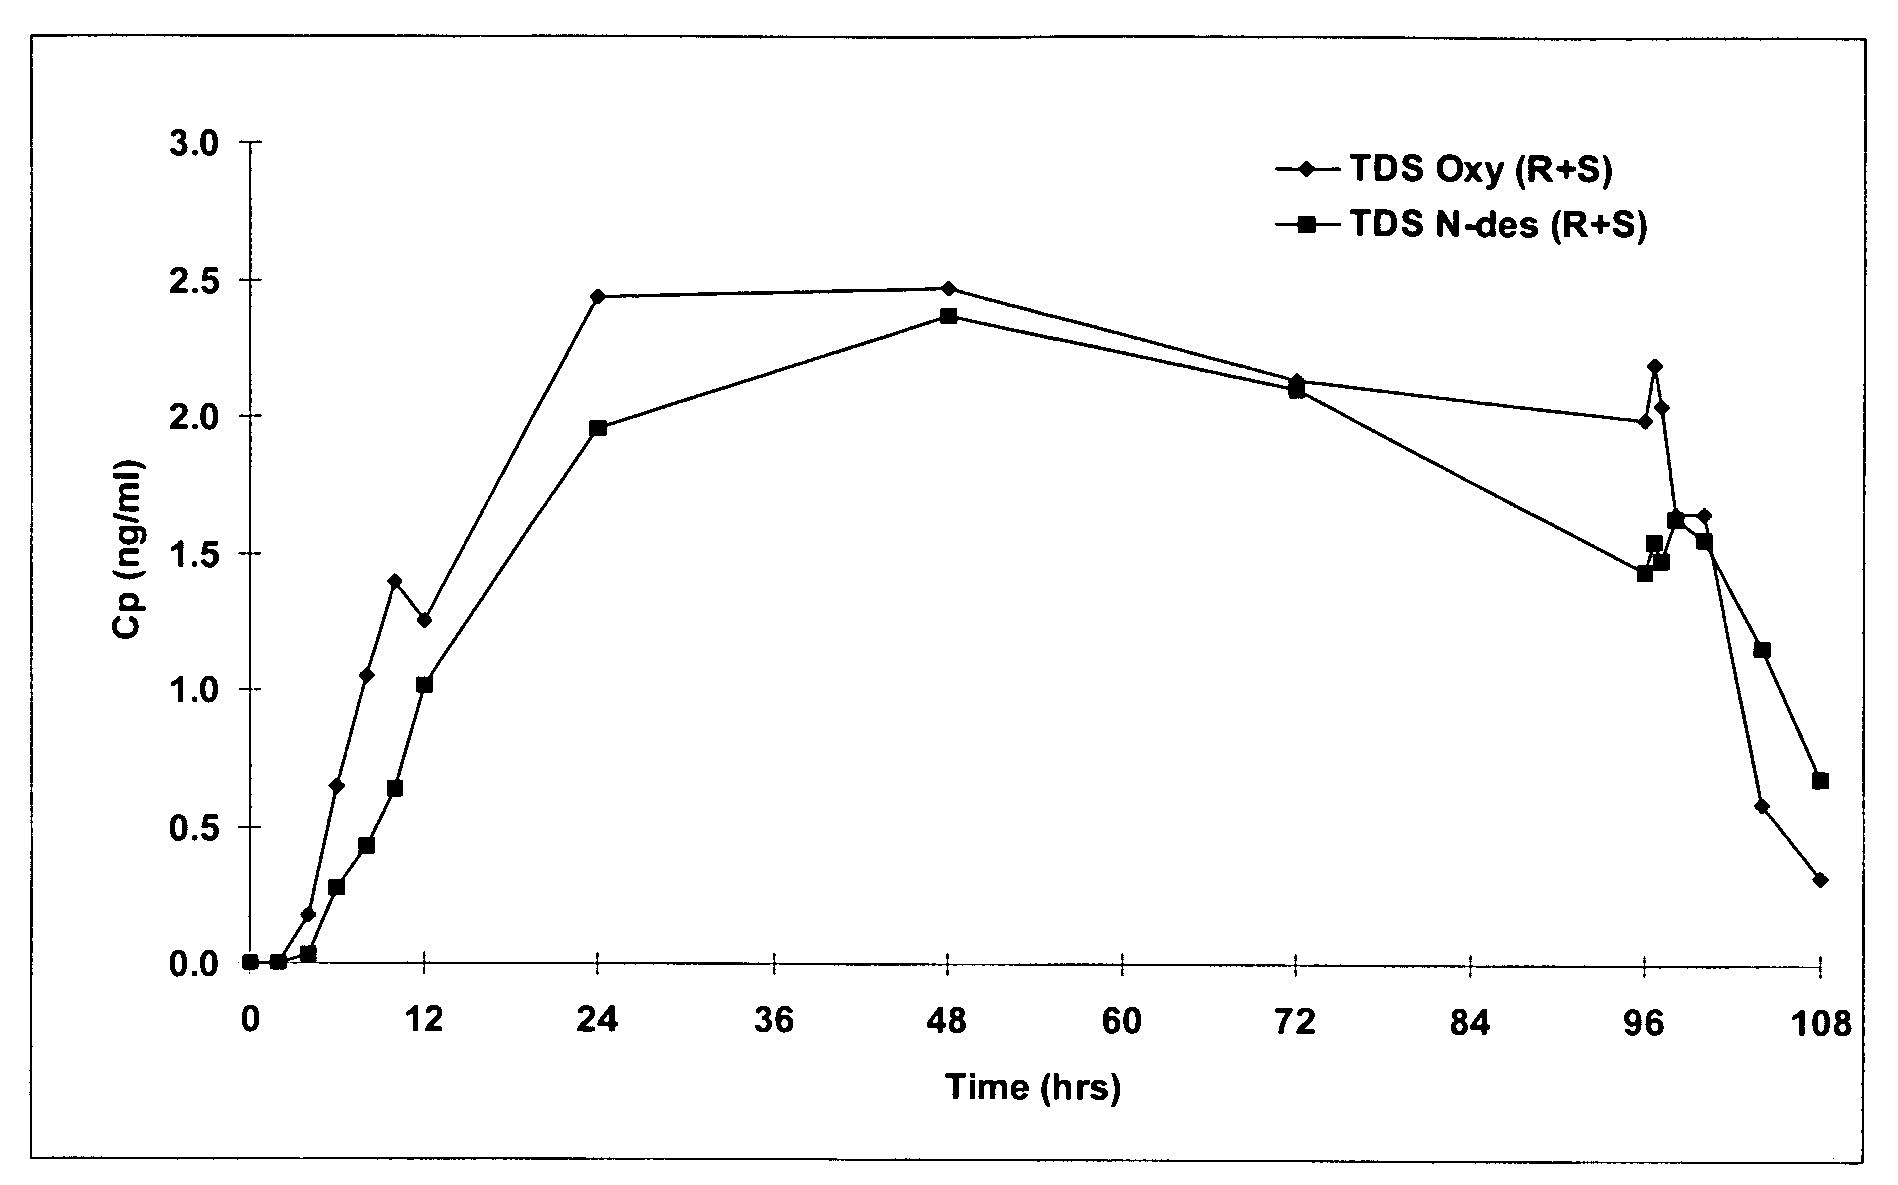 Compositions and methods for transdermal oxybutynin therapy